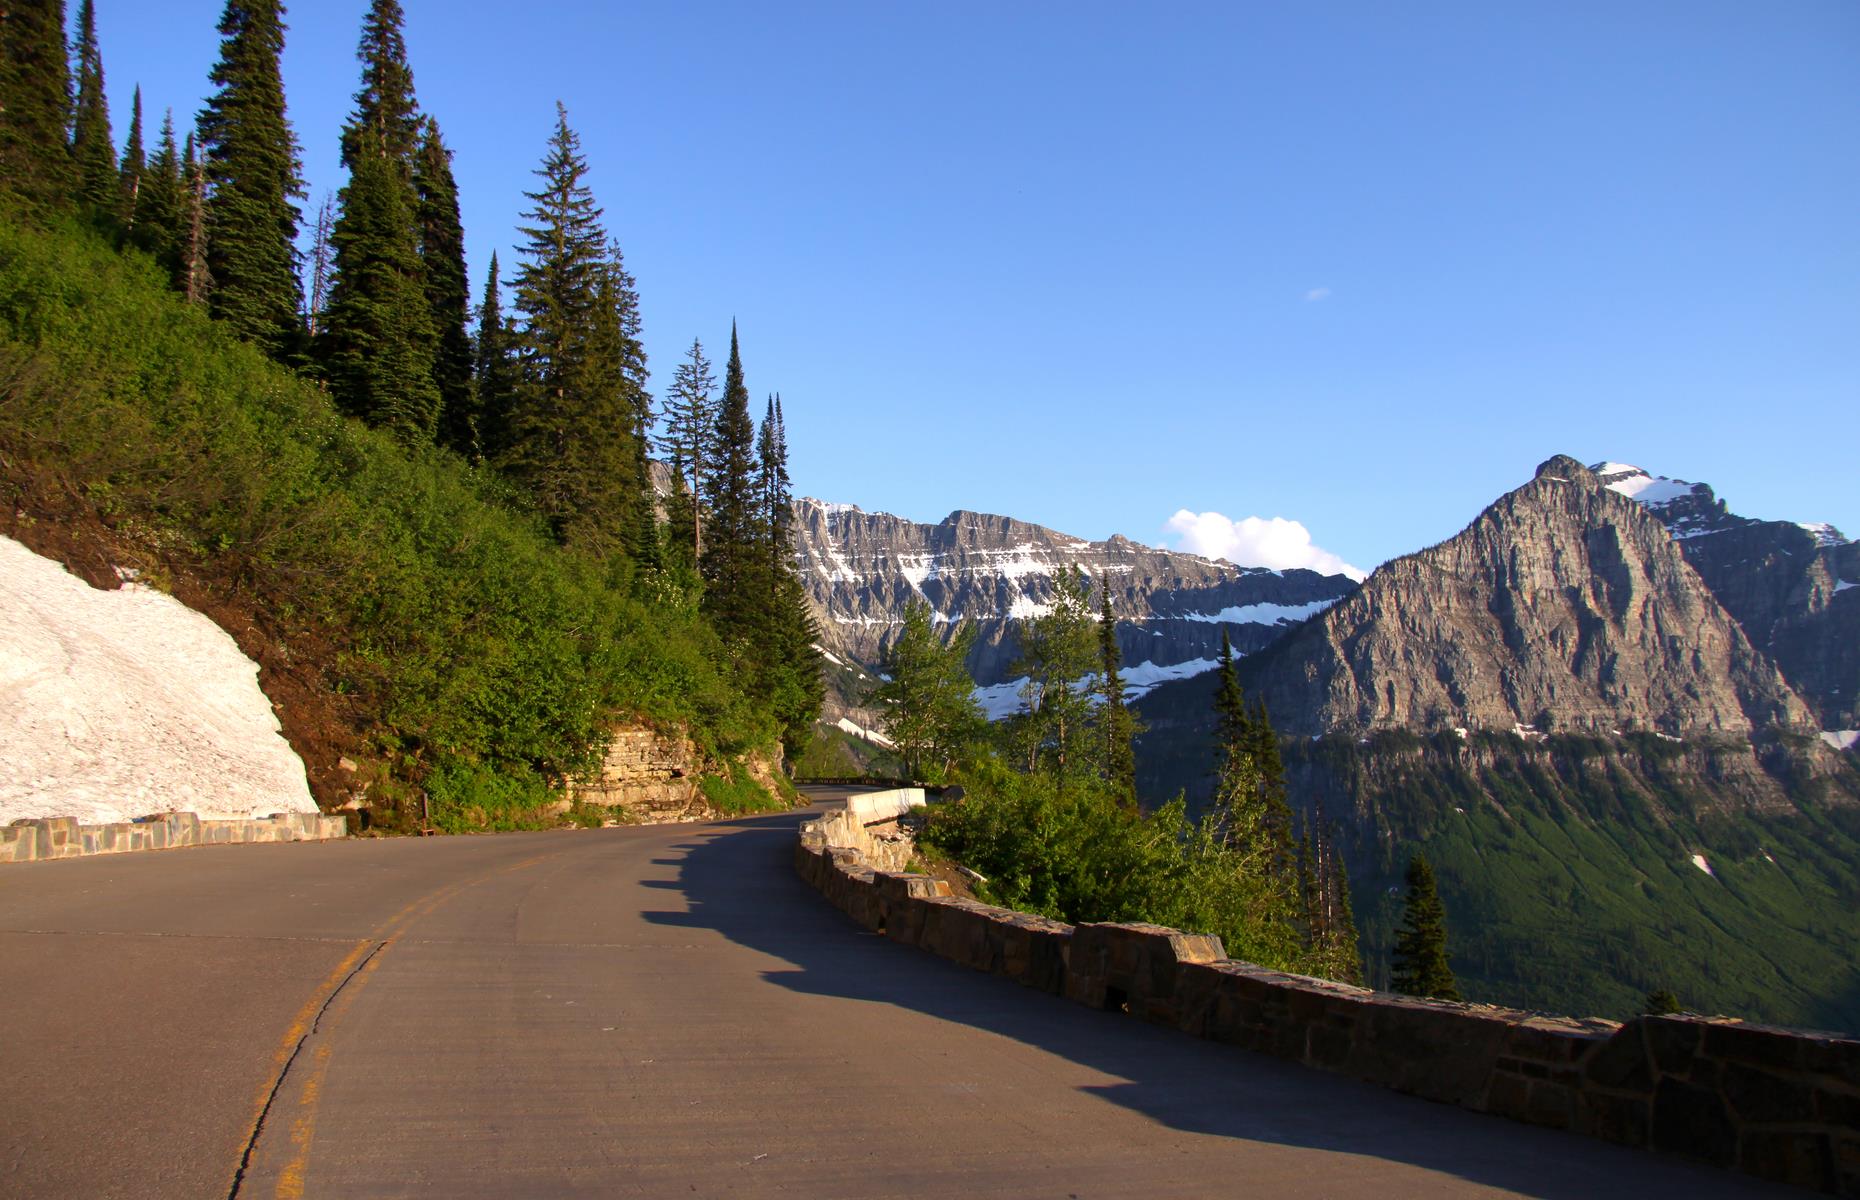 <p>Allow a few hours to zigzag your way up this 50-mile (80km) <a href="https://www.nps.gov/glac/planyourvisit/gtsrinfo.htm">iconic mountain road</a> in Glacier National Park. As you climb higher, and the air becomes thinner, the scenery gets ever more spectacular. Mountain goats cling to cliff sides, glaciers peek above pine forest and flower-strewn valleys tumble down to glassy lakes. Plan stops at Jackson Glacier Overlook, with a perfectly framed view of the park’s seventh-largest glacier, and Logan Pass, the highest spot you can reach by car. See <a href="https://www.loveexploring.com/galleries/84907/jaw-dropping-pictures-of-the-worlds-most-dangerous-roads?page=1">jaw-dropping pictures of the world's most dangerous roads</a>.</p>